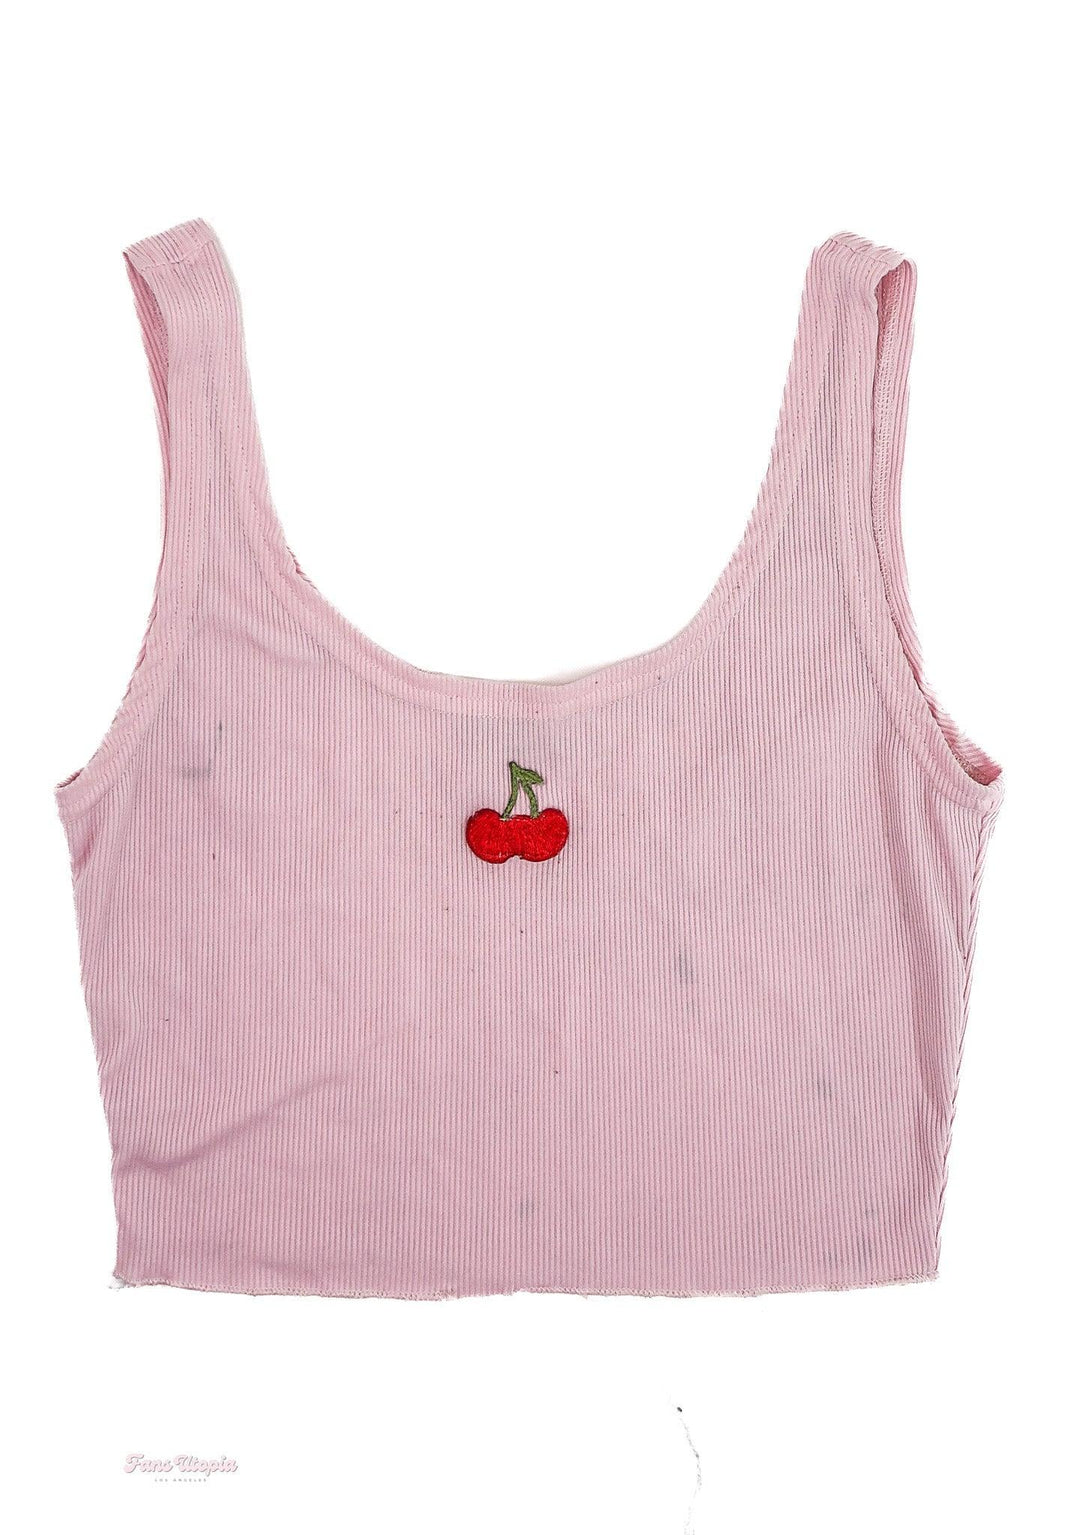 Anna Claire Clouds Pink Cherry Tank Top - FANS UTOPIA